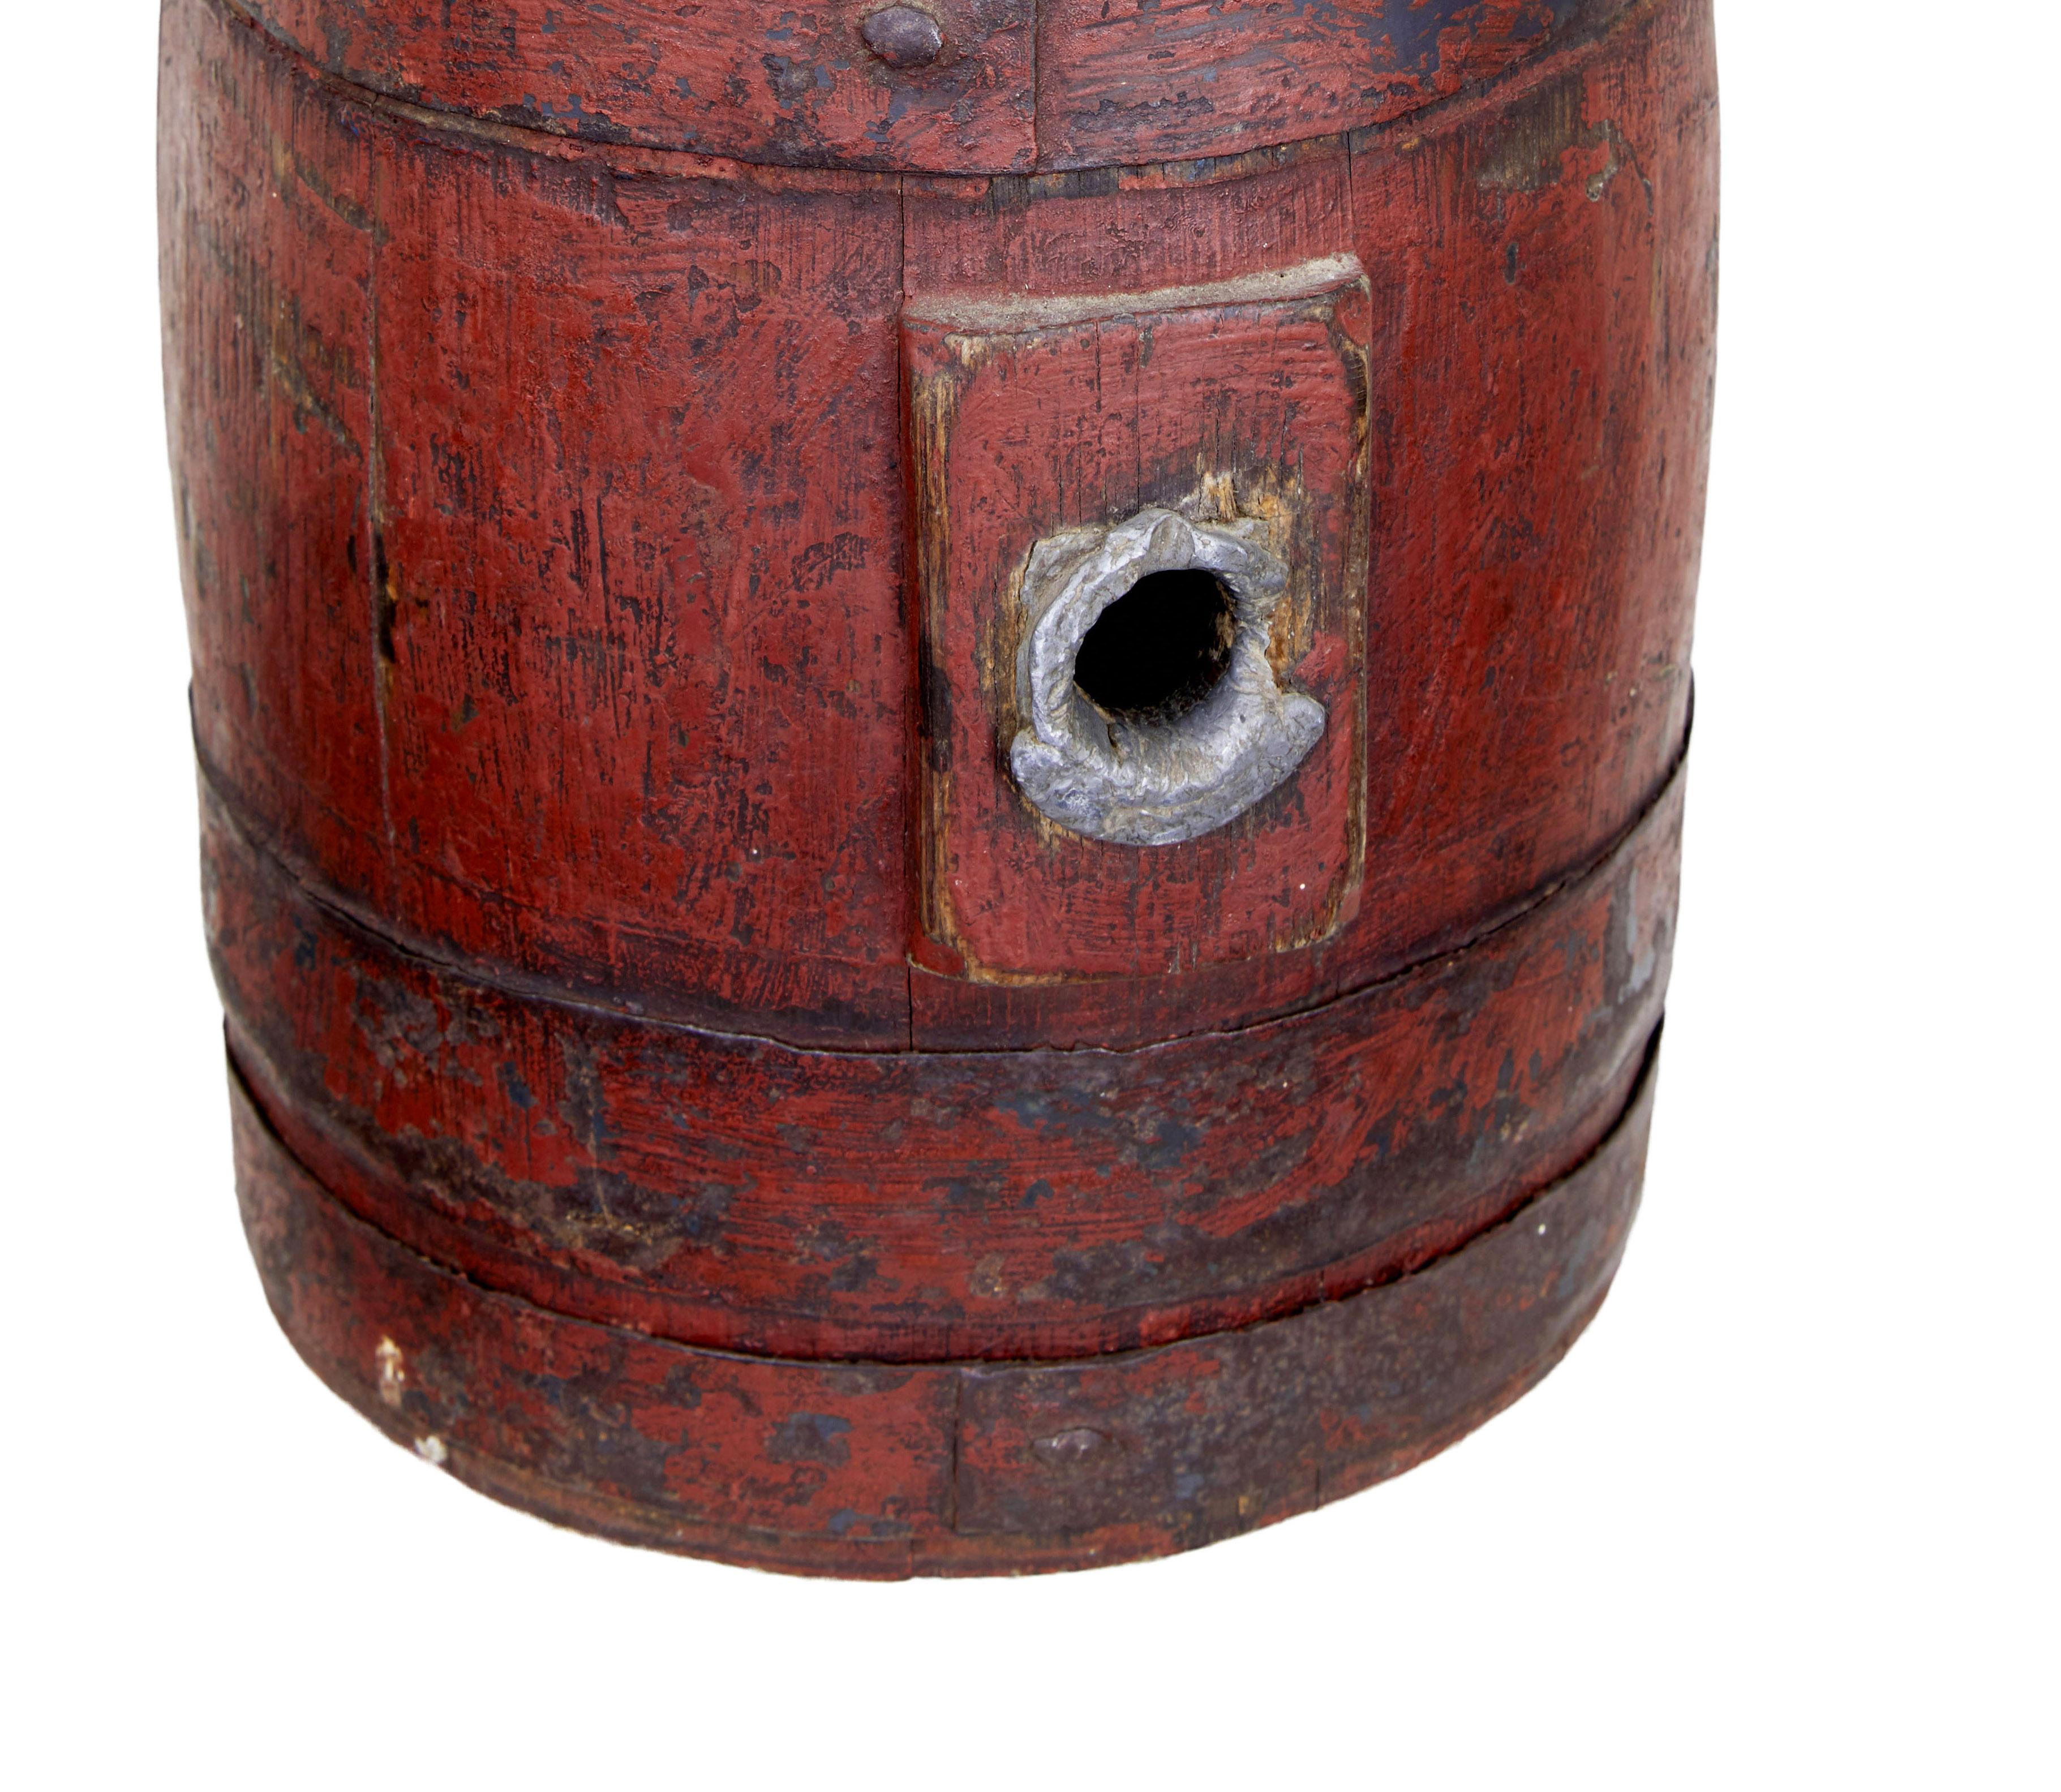 19th century Scandinavian painted oak barrel, circa 1870.

Beautiful miniature oak barrel used for storage and ageing of spirits. Hand painted in traditional colours, with metal strap work. Lead lined entrance to wear the cork is placed. Original